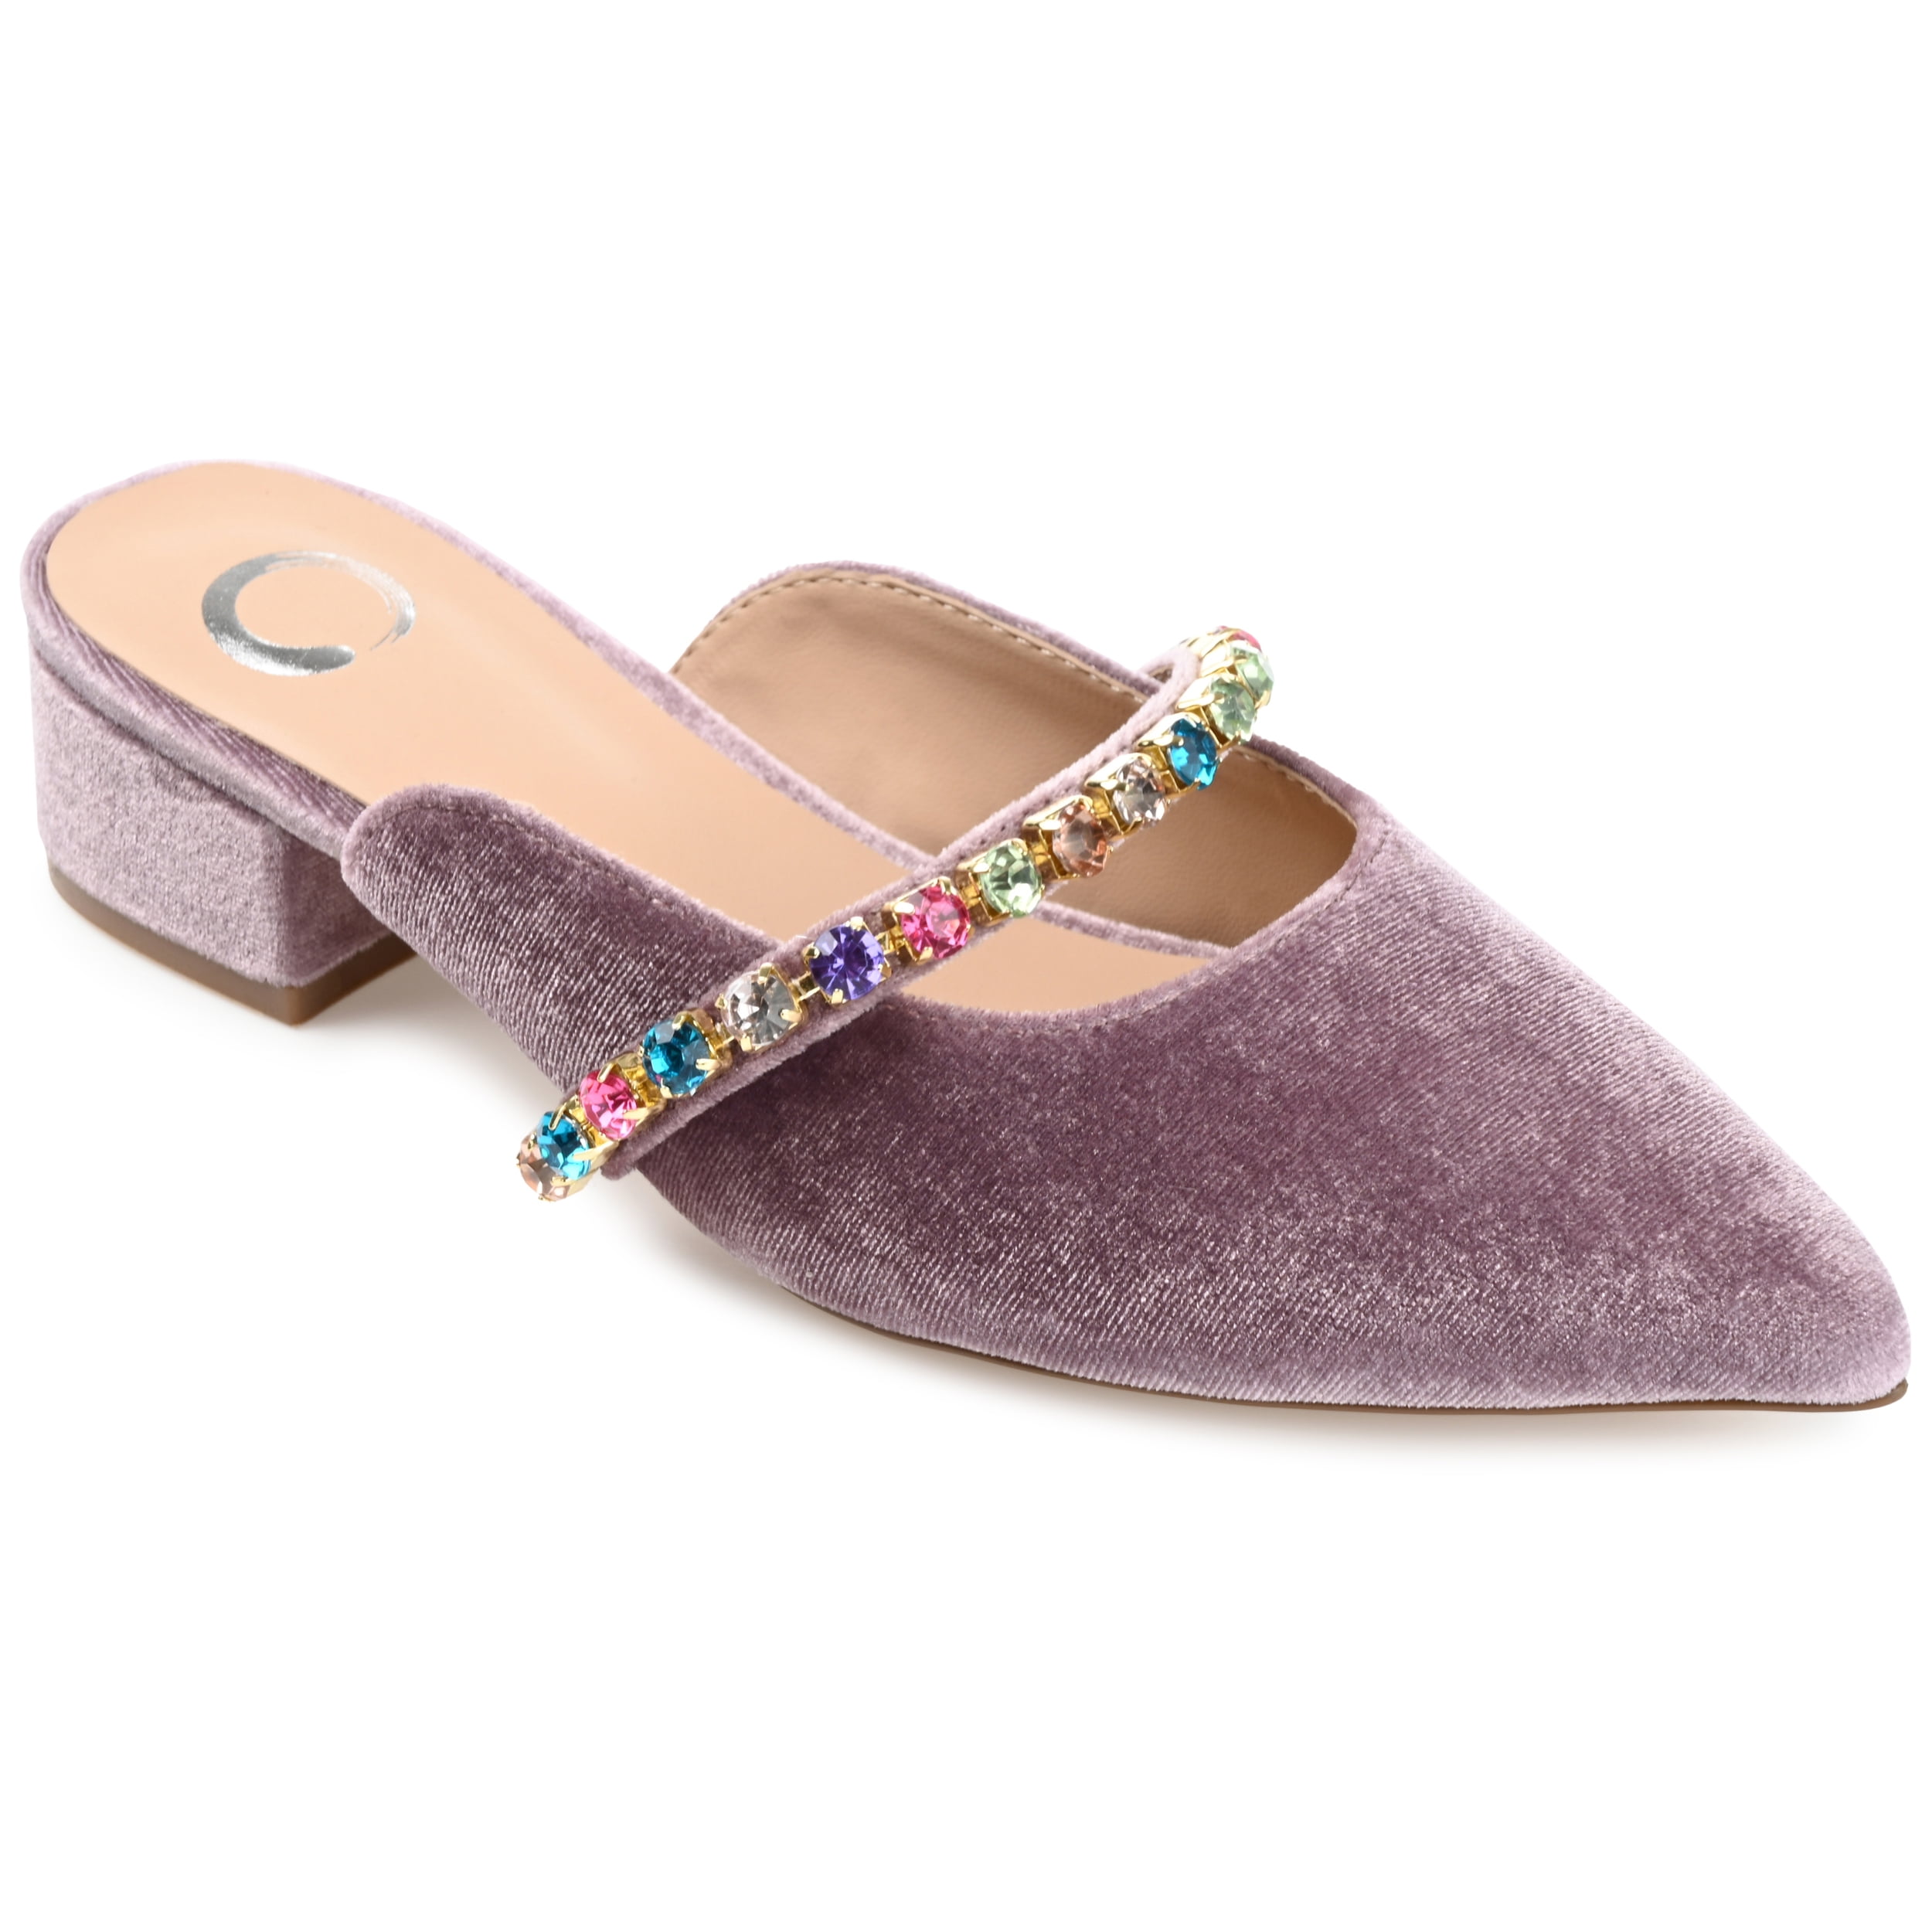 Journee Collection Womens Jewel Mules Pointed Toe Slip On Flats ...